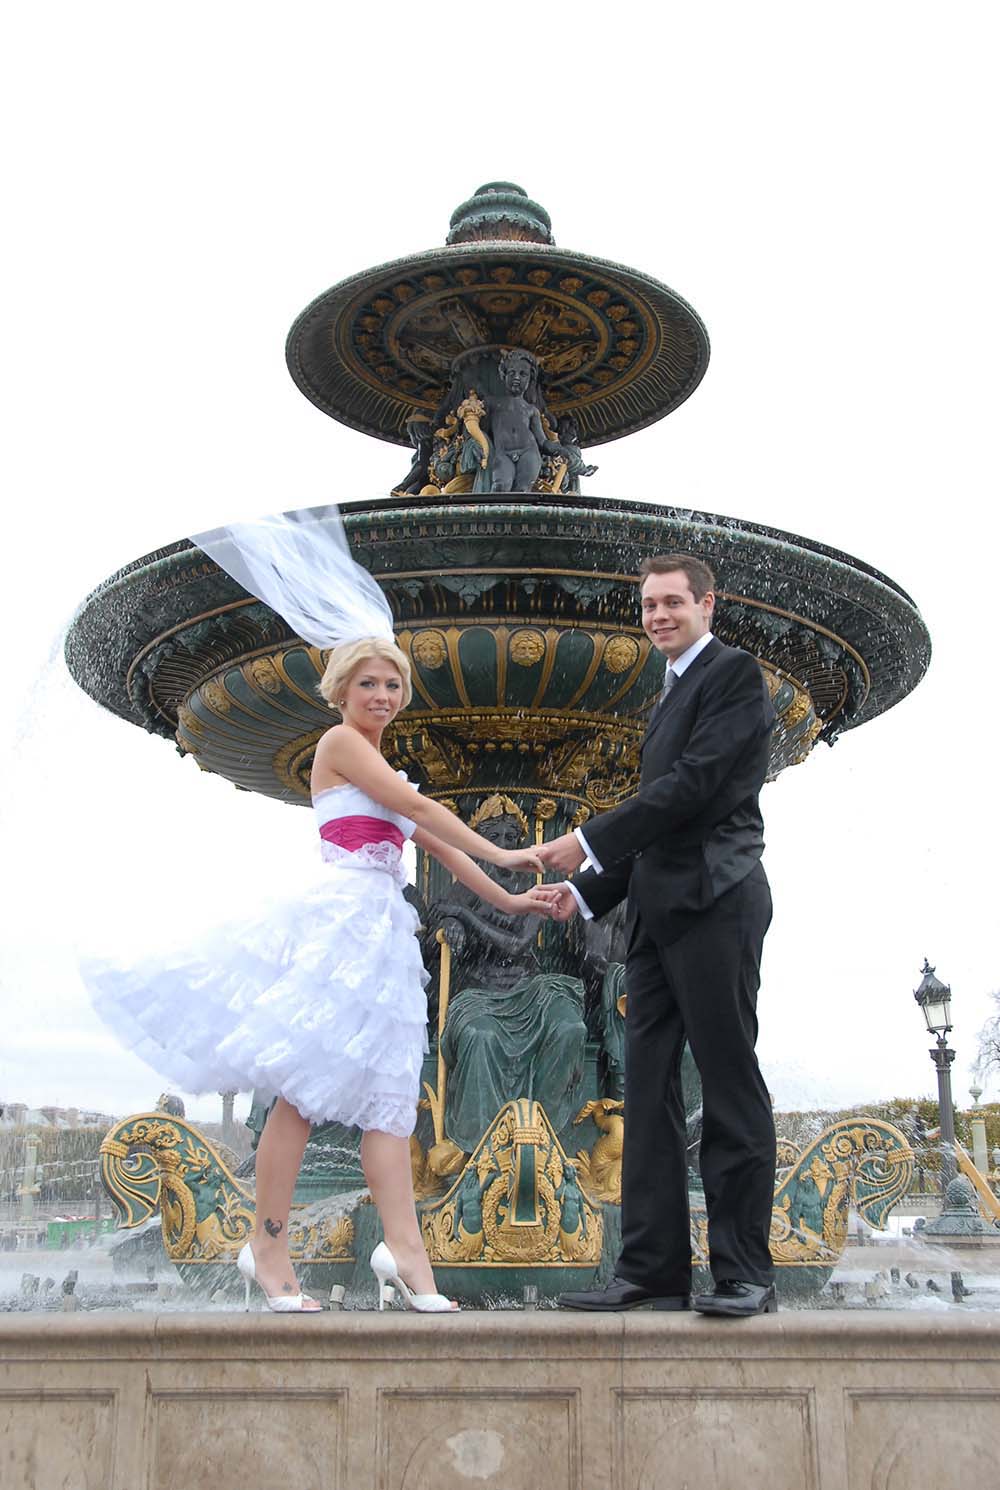 Wedding couple standing on Concorde Fountain, Paris, France